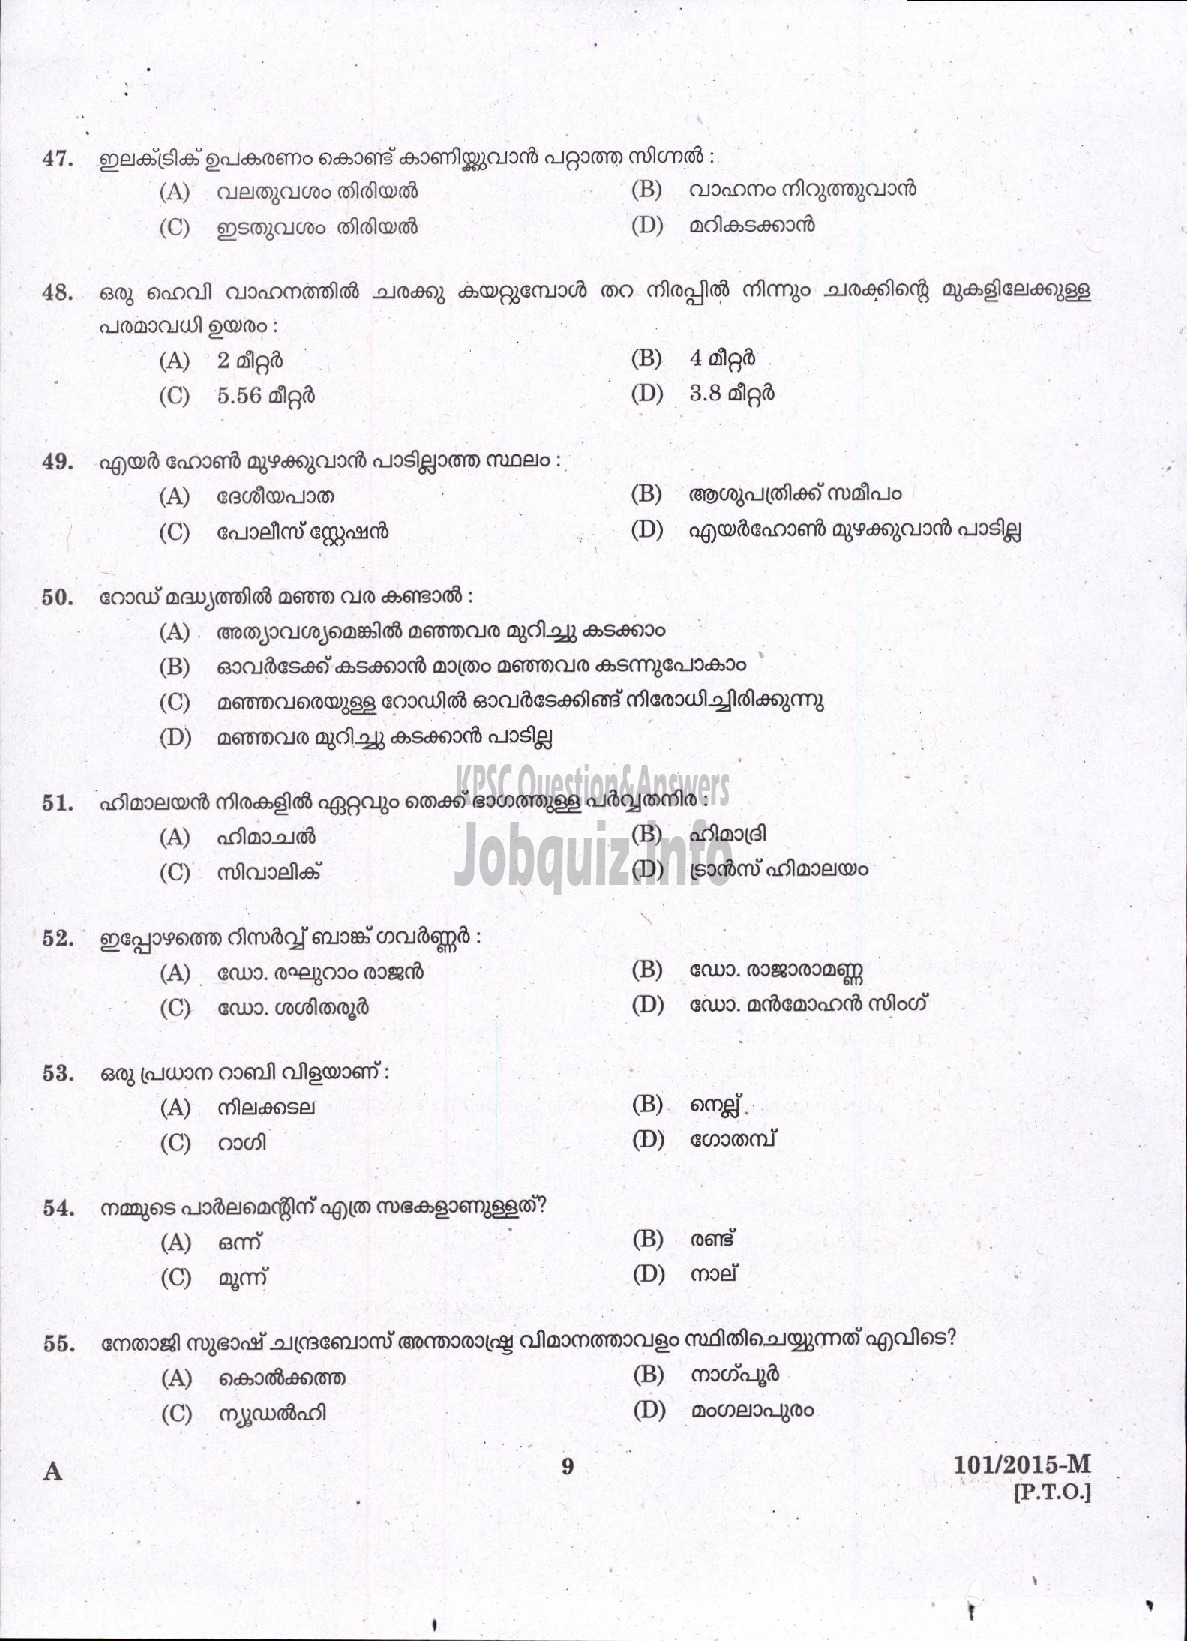 Kerala PSC Question Paper - FIREMAN DRIVER CUM PUMP OPERATOR TRAINEE FIRE AND RESCUE SERVICES ( Malayalam ) -7